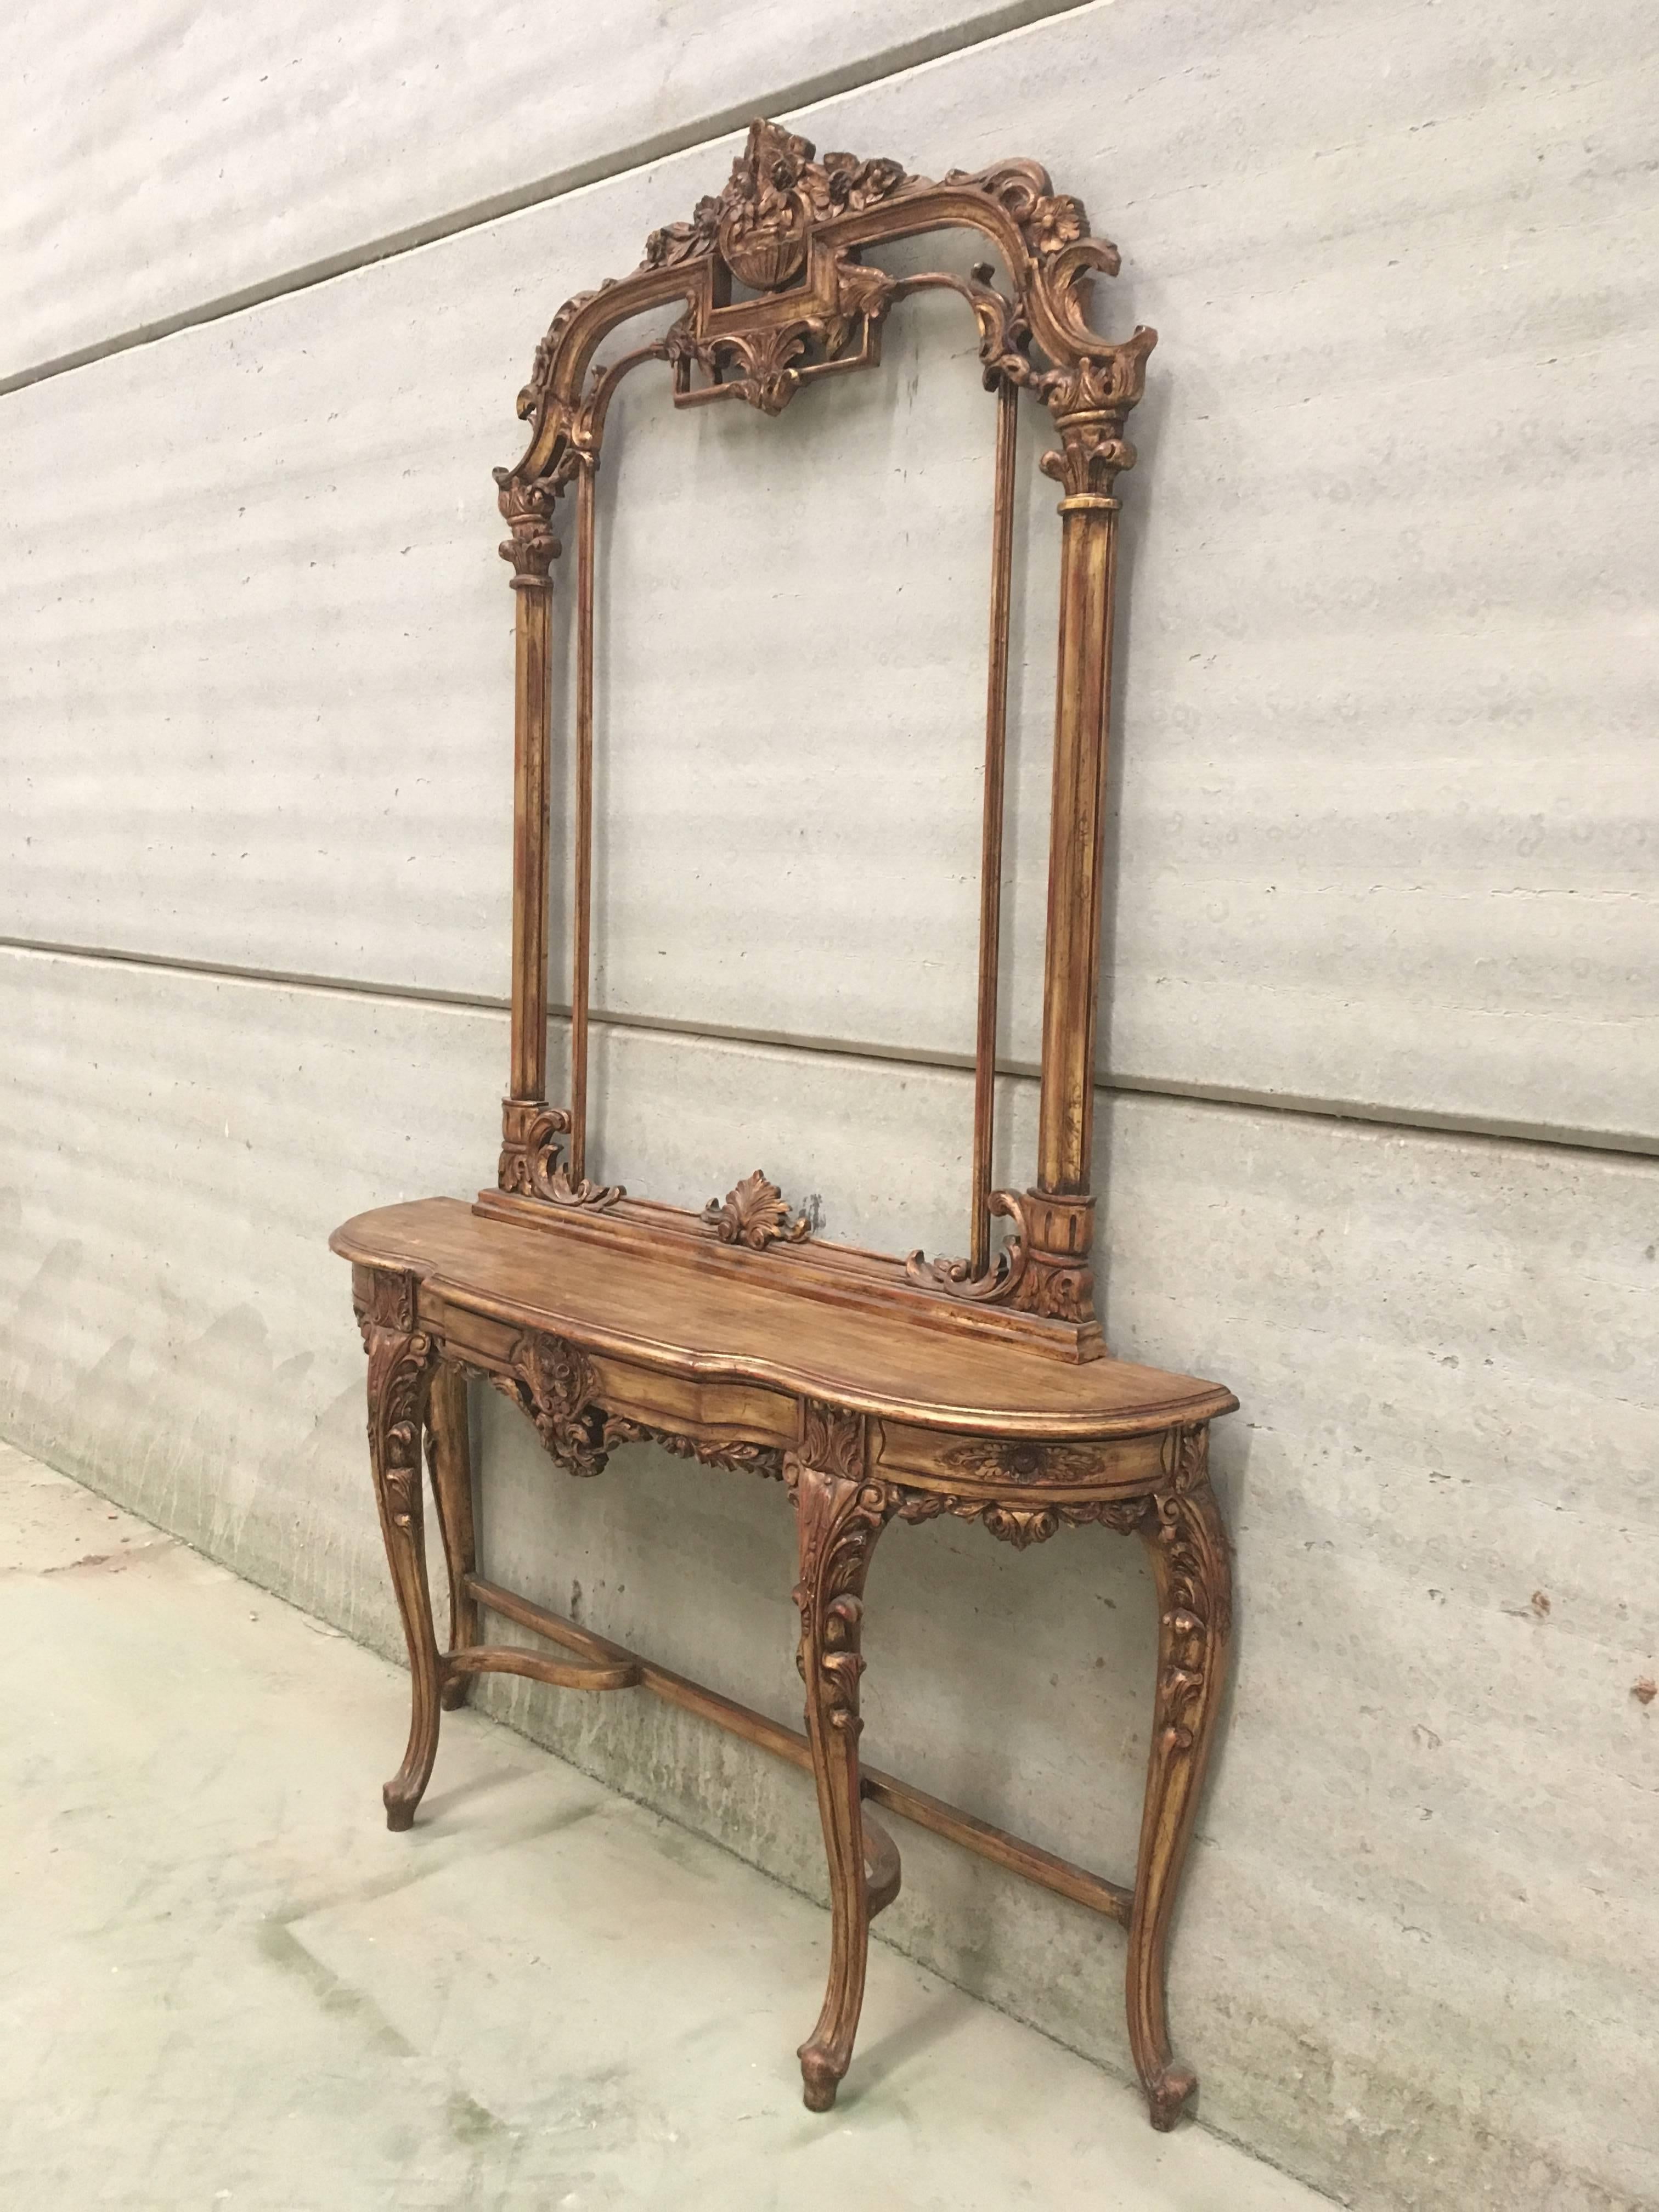 20th century fine Renaissance carved and gilded walnut pier mirror frame and console table with beautiful original patina

Mirror measurements:
Width 45.66in
Height 57.87in
Depth 2.16in.